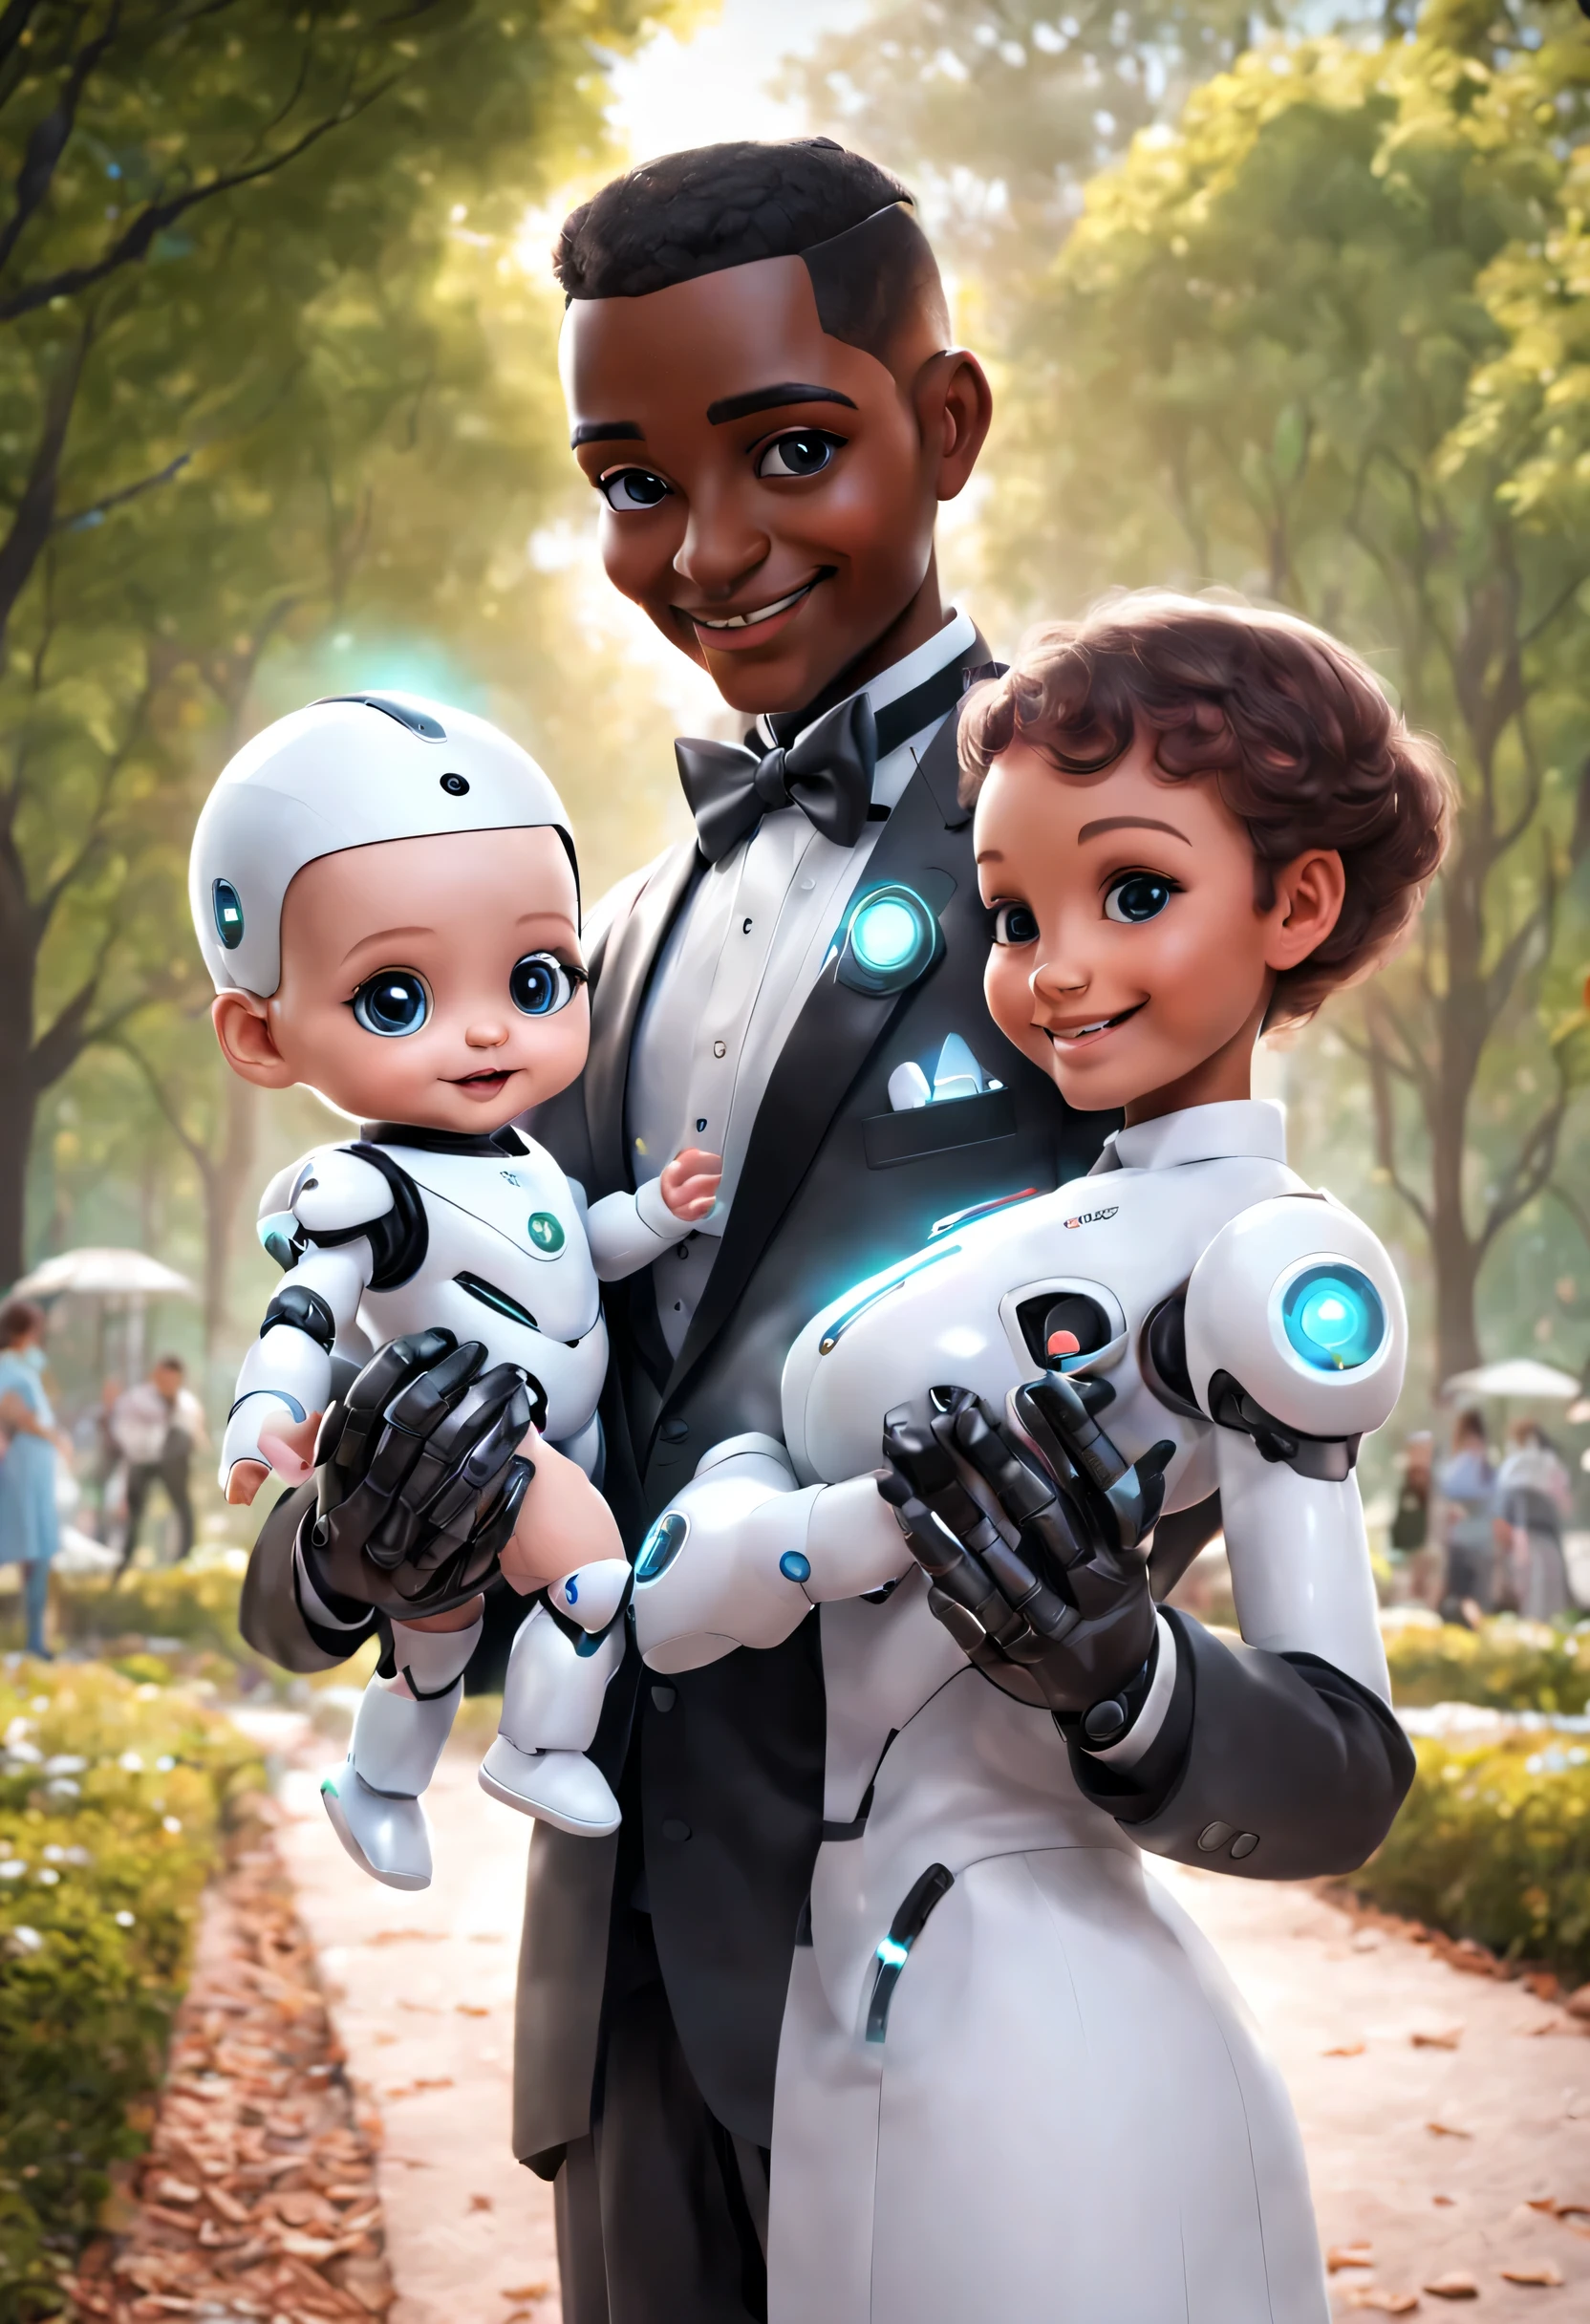 (Robot butler holds a cute human baby in the park), Robot butler takes care of baby throughout the process. The head is equipped with a high-definition analog face display, Warm and friendly smile, Happy, Wearing holographic white butler uniform dress suit, Future character design, scientific fiction, Black technology, 3D, cyber punk style
,